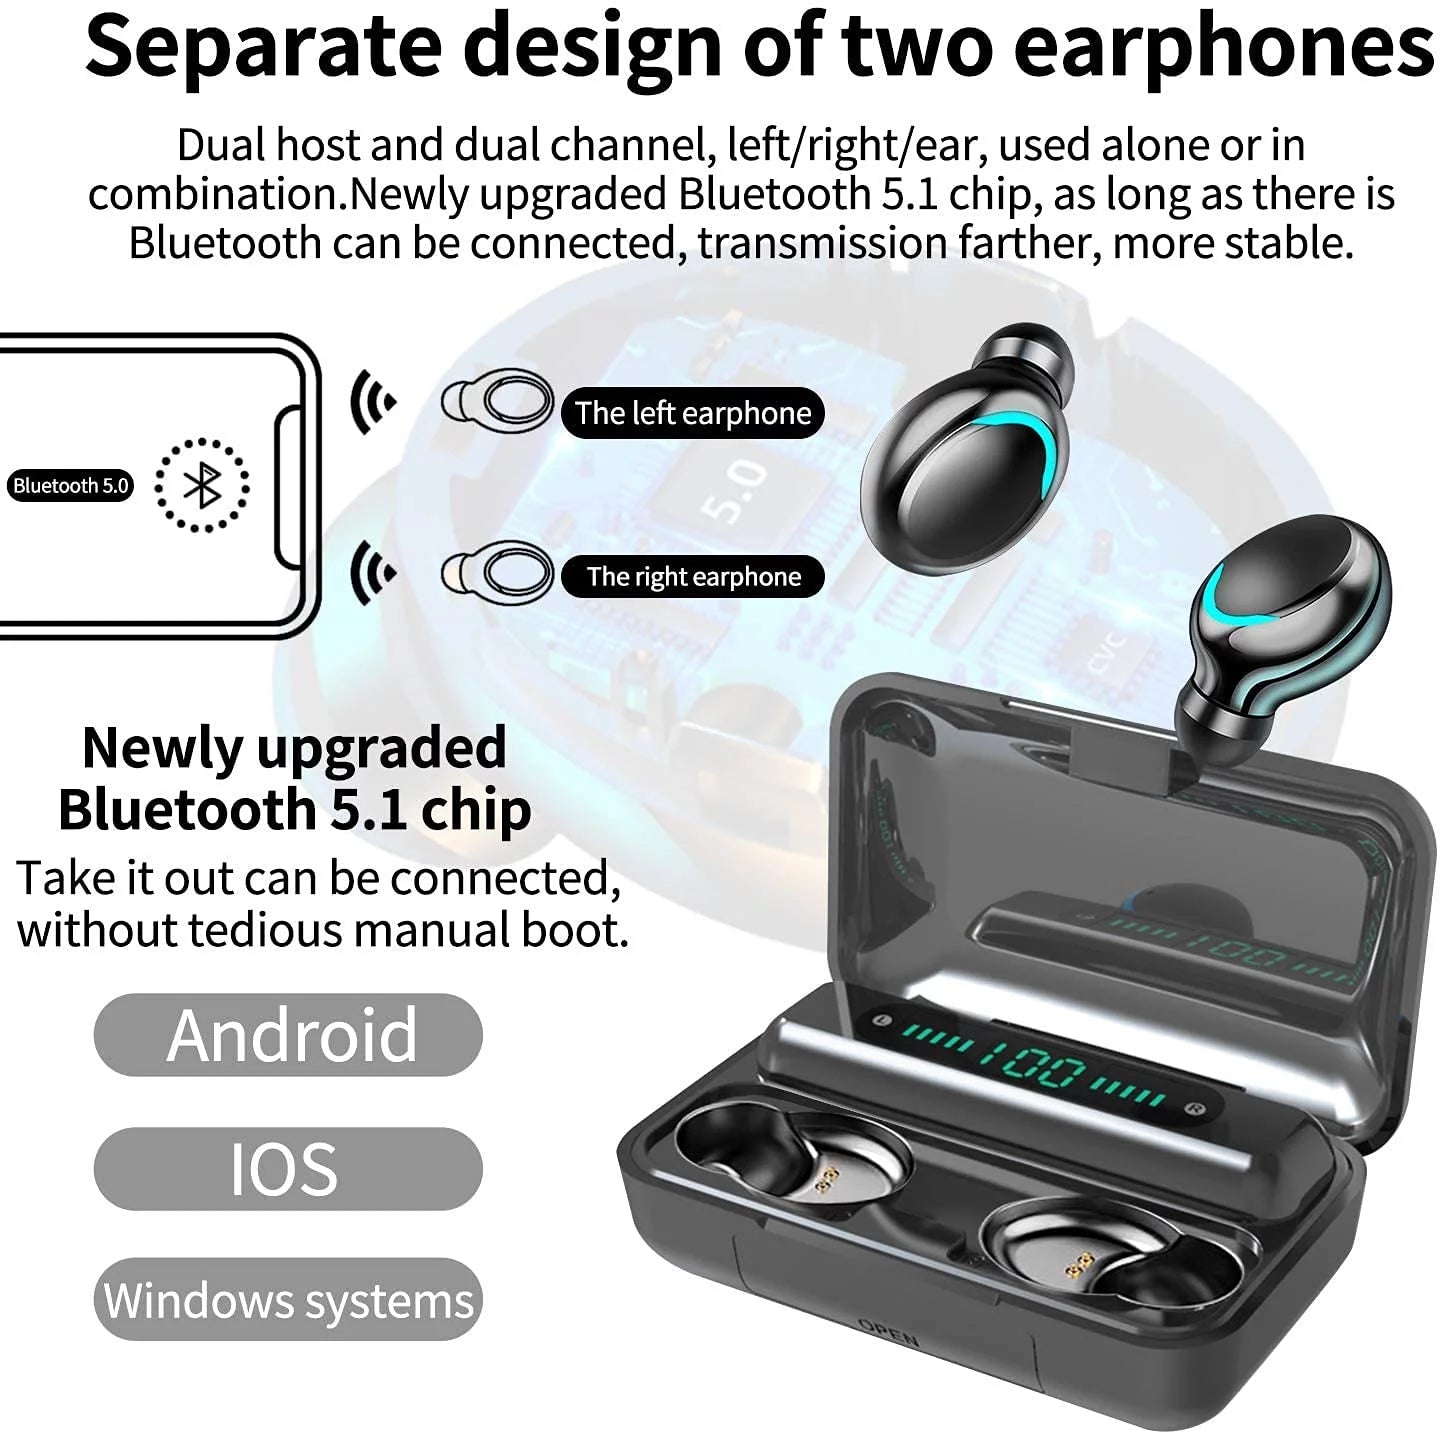 Wireless Earbuds Bluetooth Earphones for Iphone Samsung Android Phones Wireless Earbuds with 2200MAH Charging Case and Emergency Power Bank 